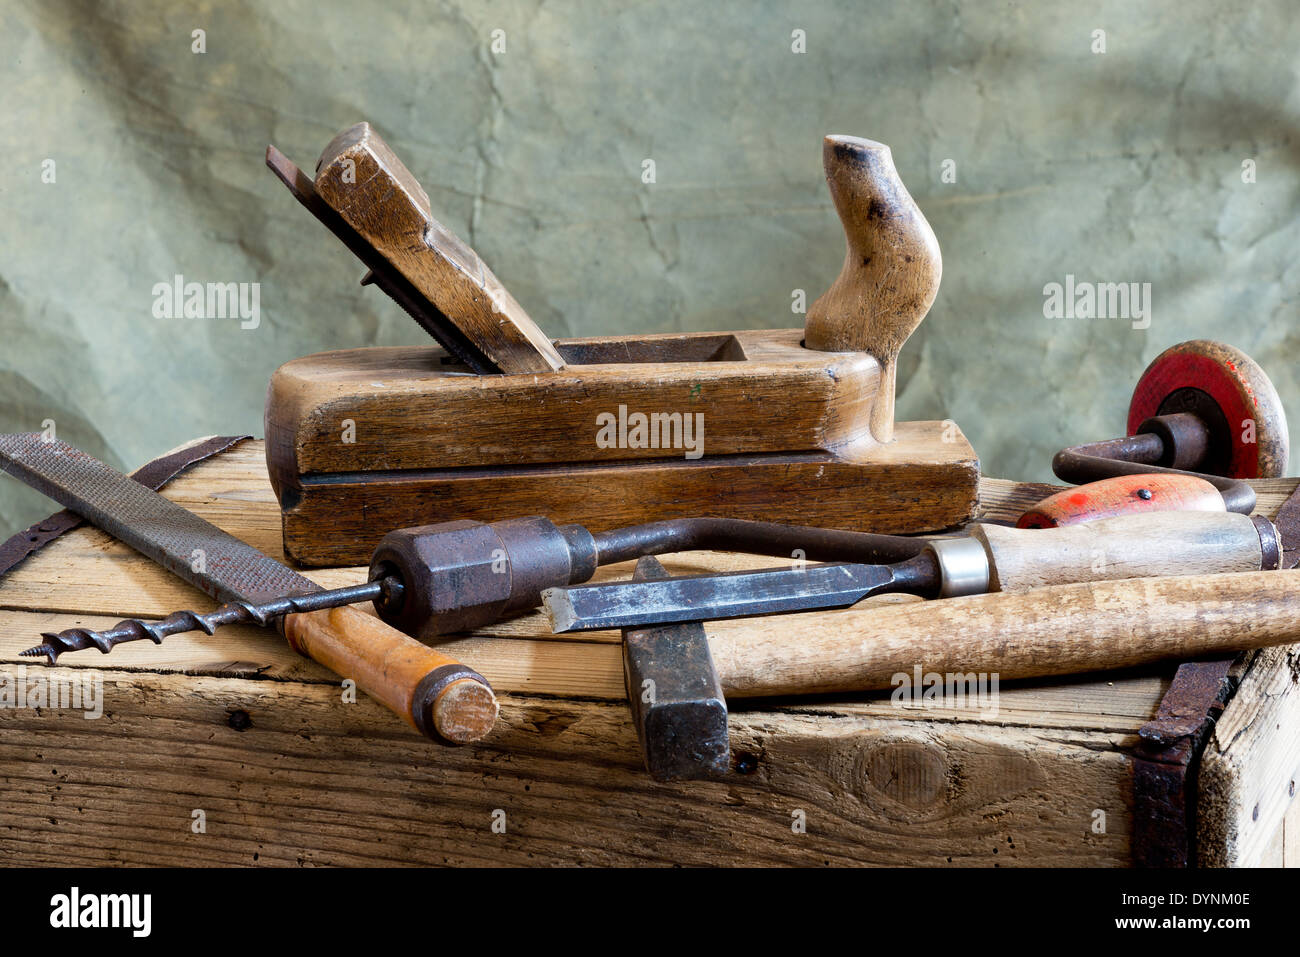 still life with old hammer and carpentry tools Stock Photo